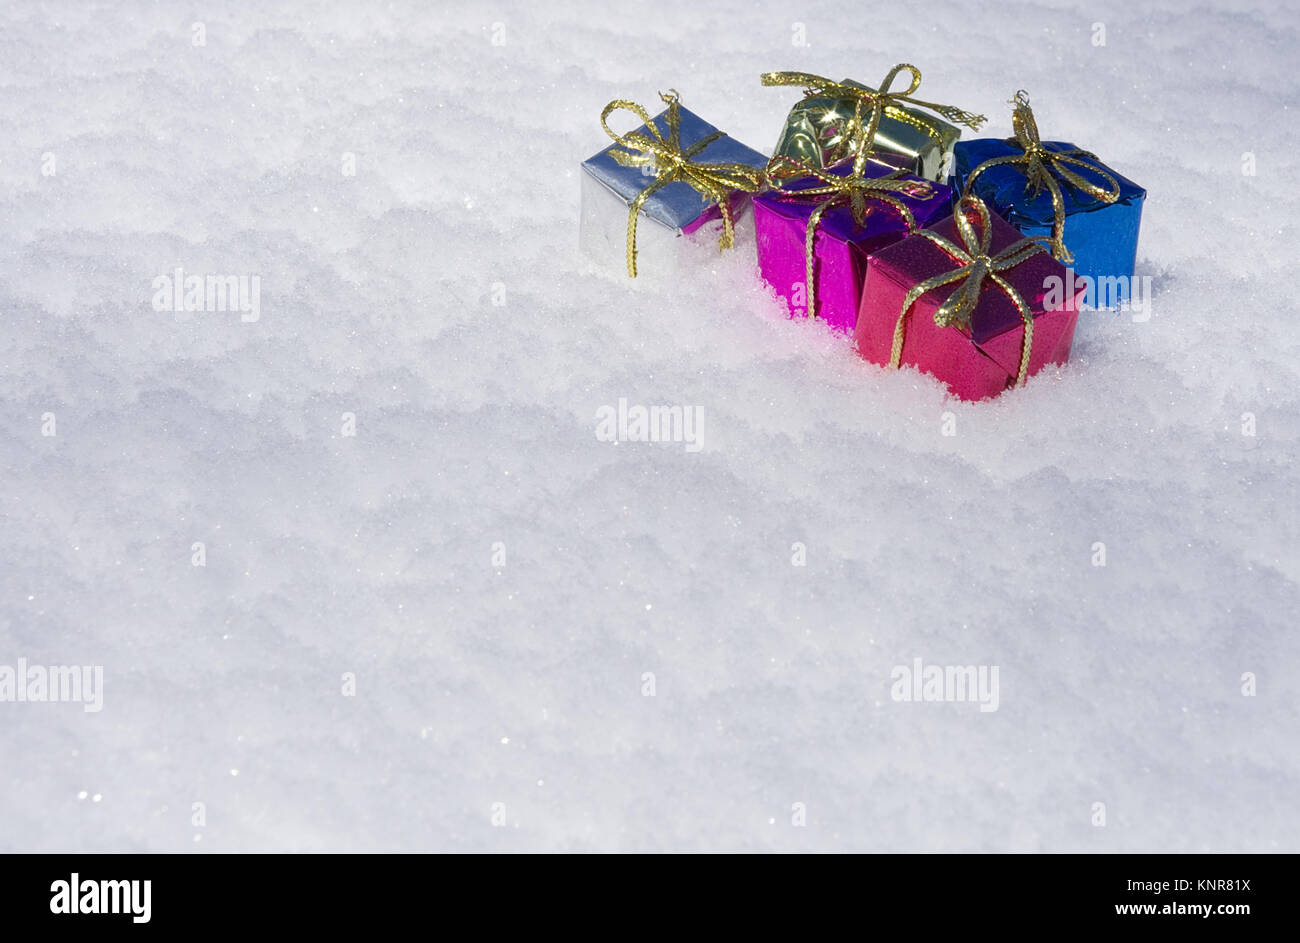 Colorful Christmas Presents in Snow Stock Photo